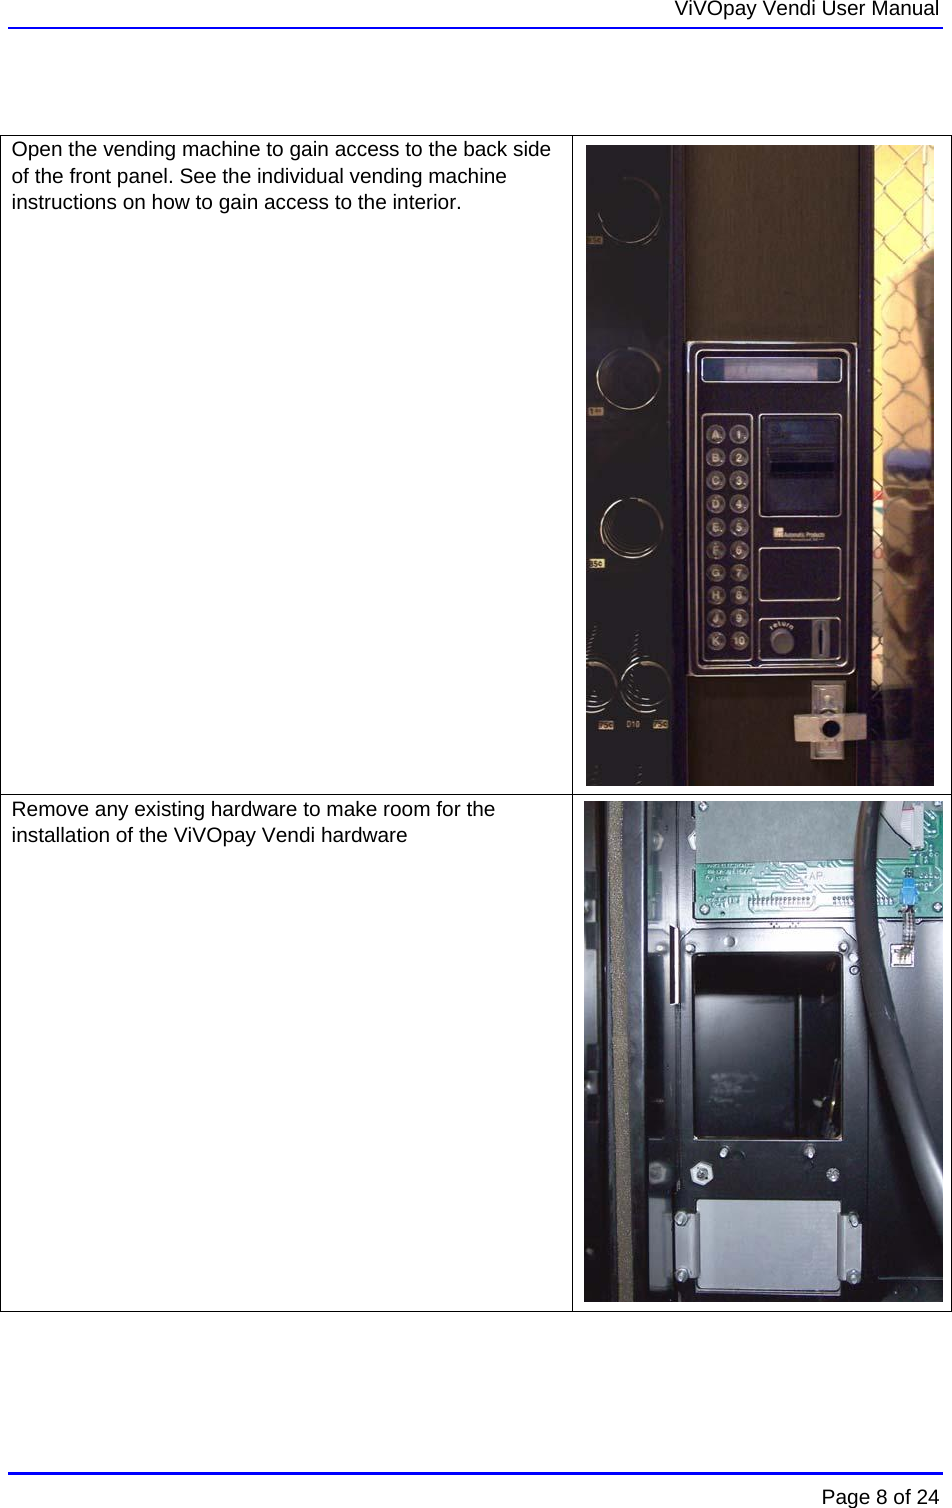   ViVOpay Vendi User Manual        Page 8 of 24     Open the vending machine to gain access to the back side of the front panel. See the individual vending machine instructions on how to gain access to the interior.  Remove any existing hardware to make room for the installation of the ViVOpay Vendi hardware  